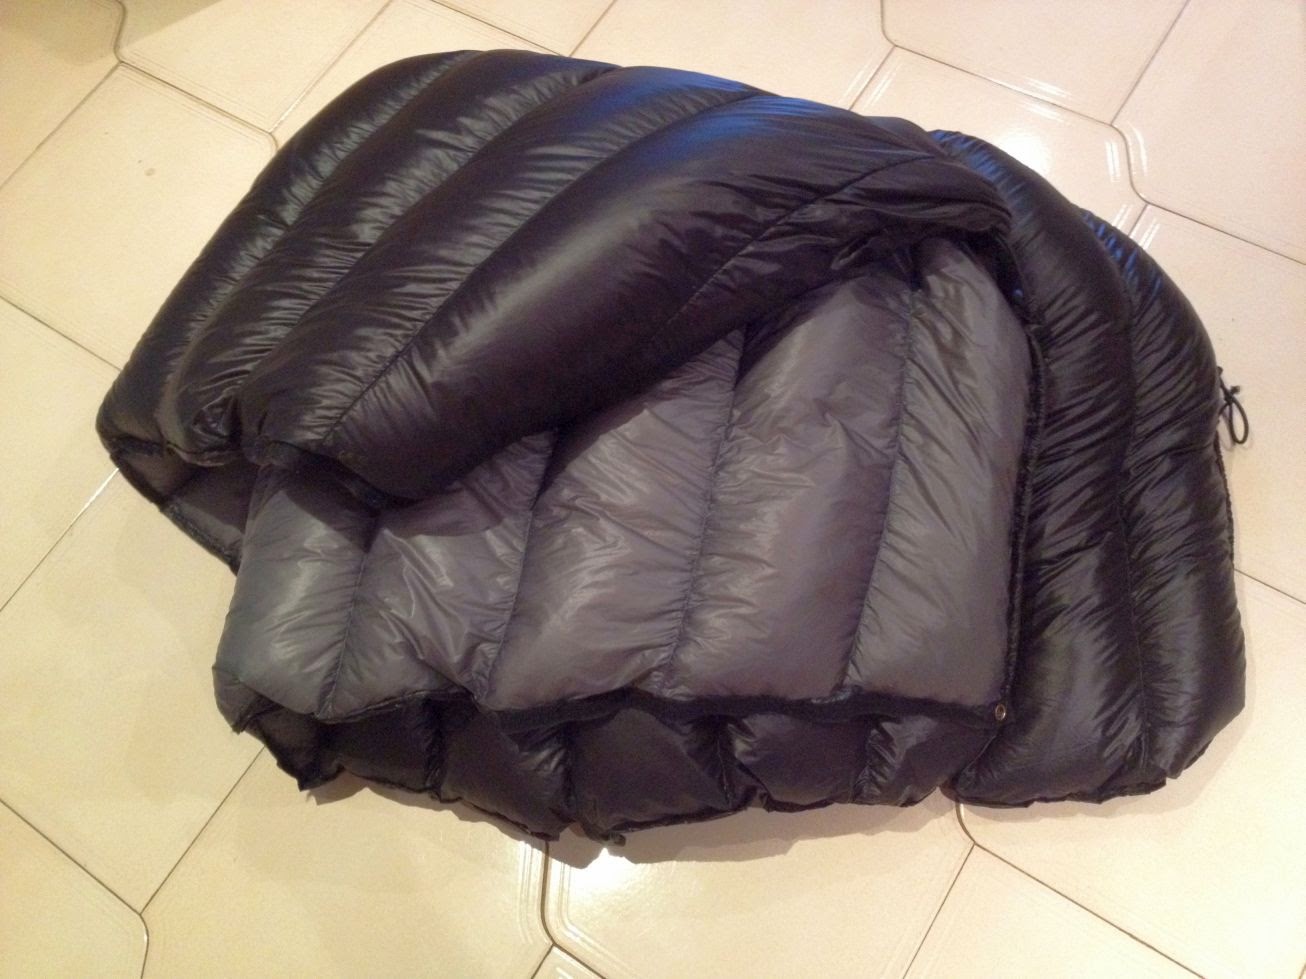 Trails and Tracks: MYOG: Down quilt for winter hiking